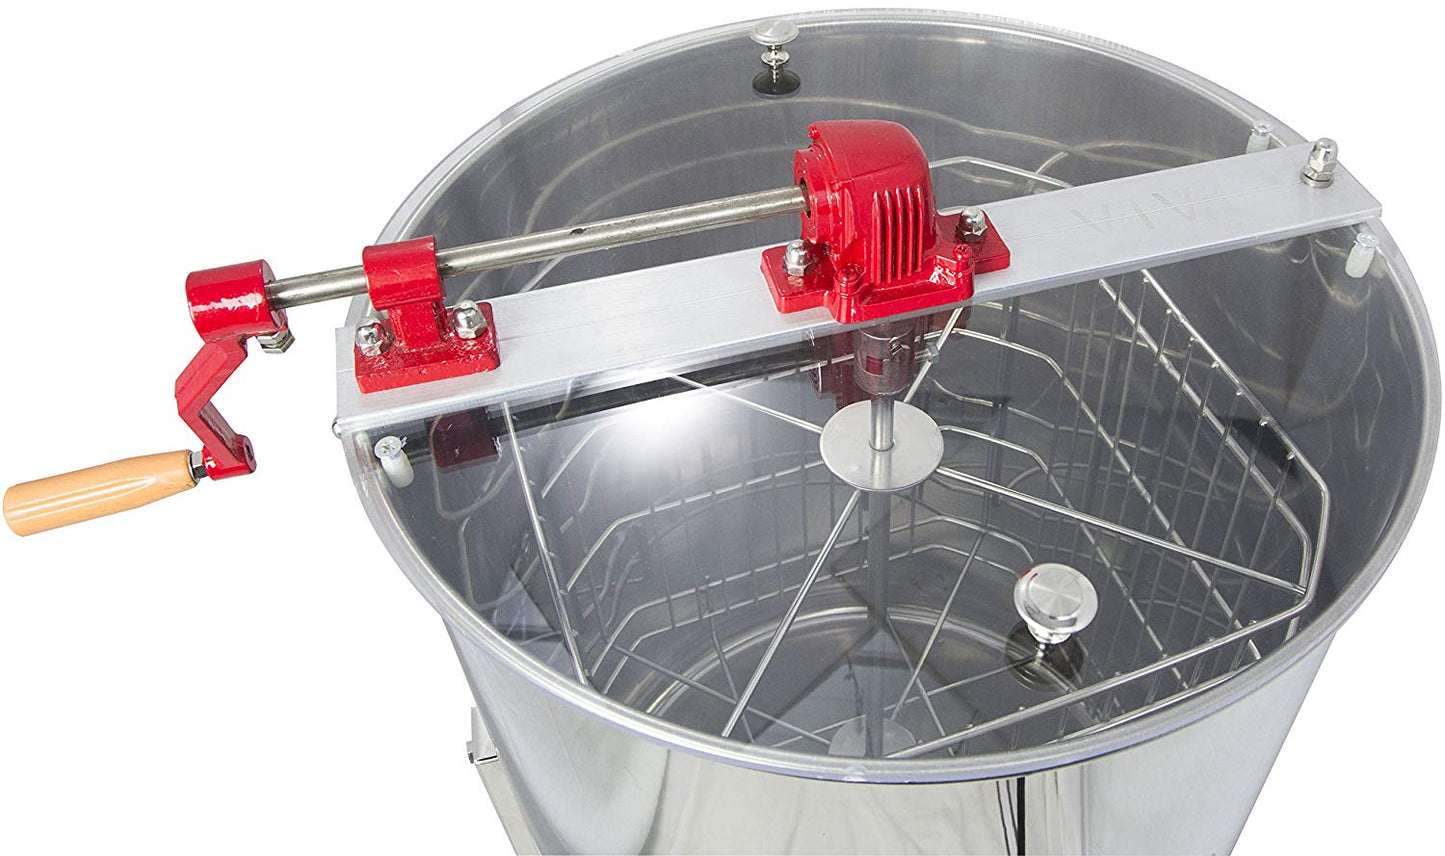 4 or 8 frame extractor (red handle)